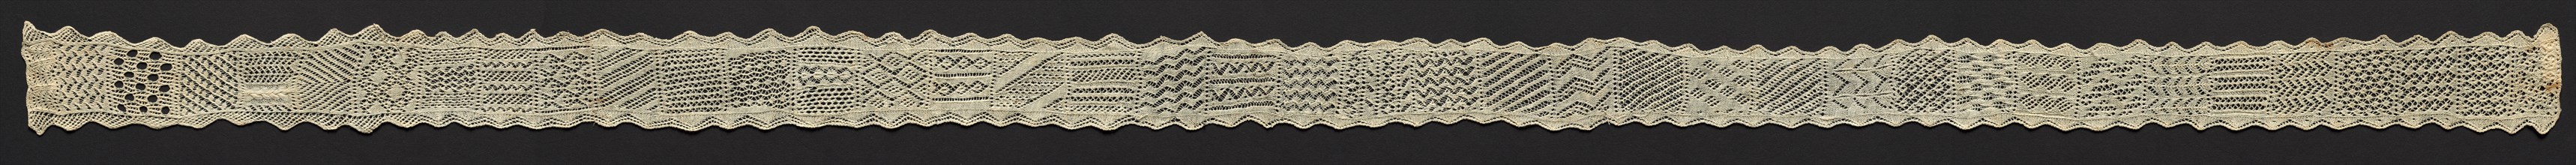 Knitted Lace Sampler, 19th century. Italy, Sienna, 19th century. Knitted linen; average: 163.9 x 6